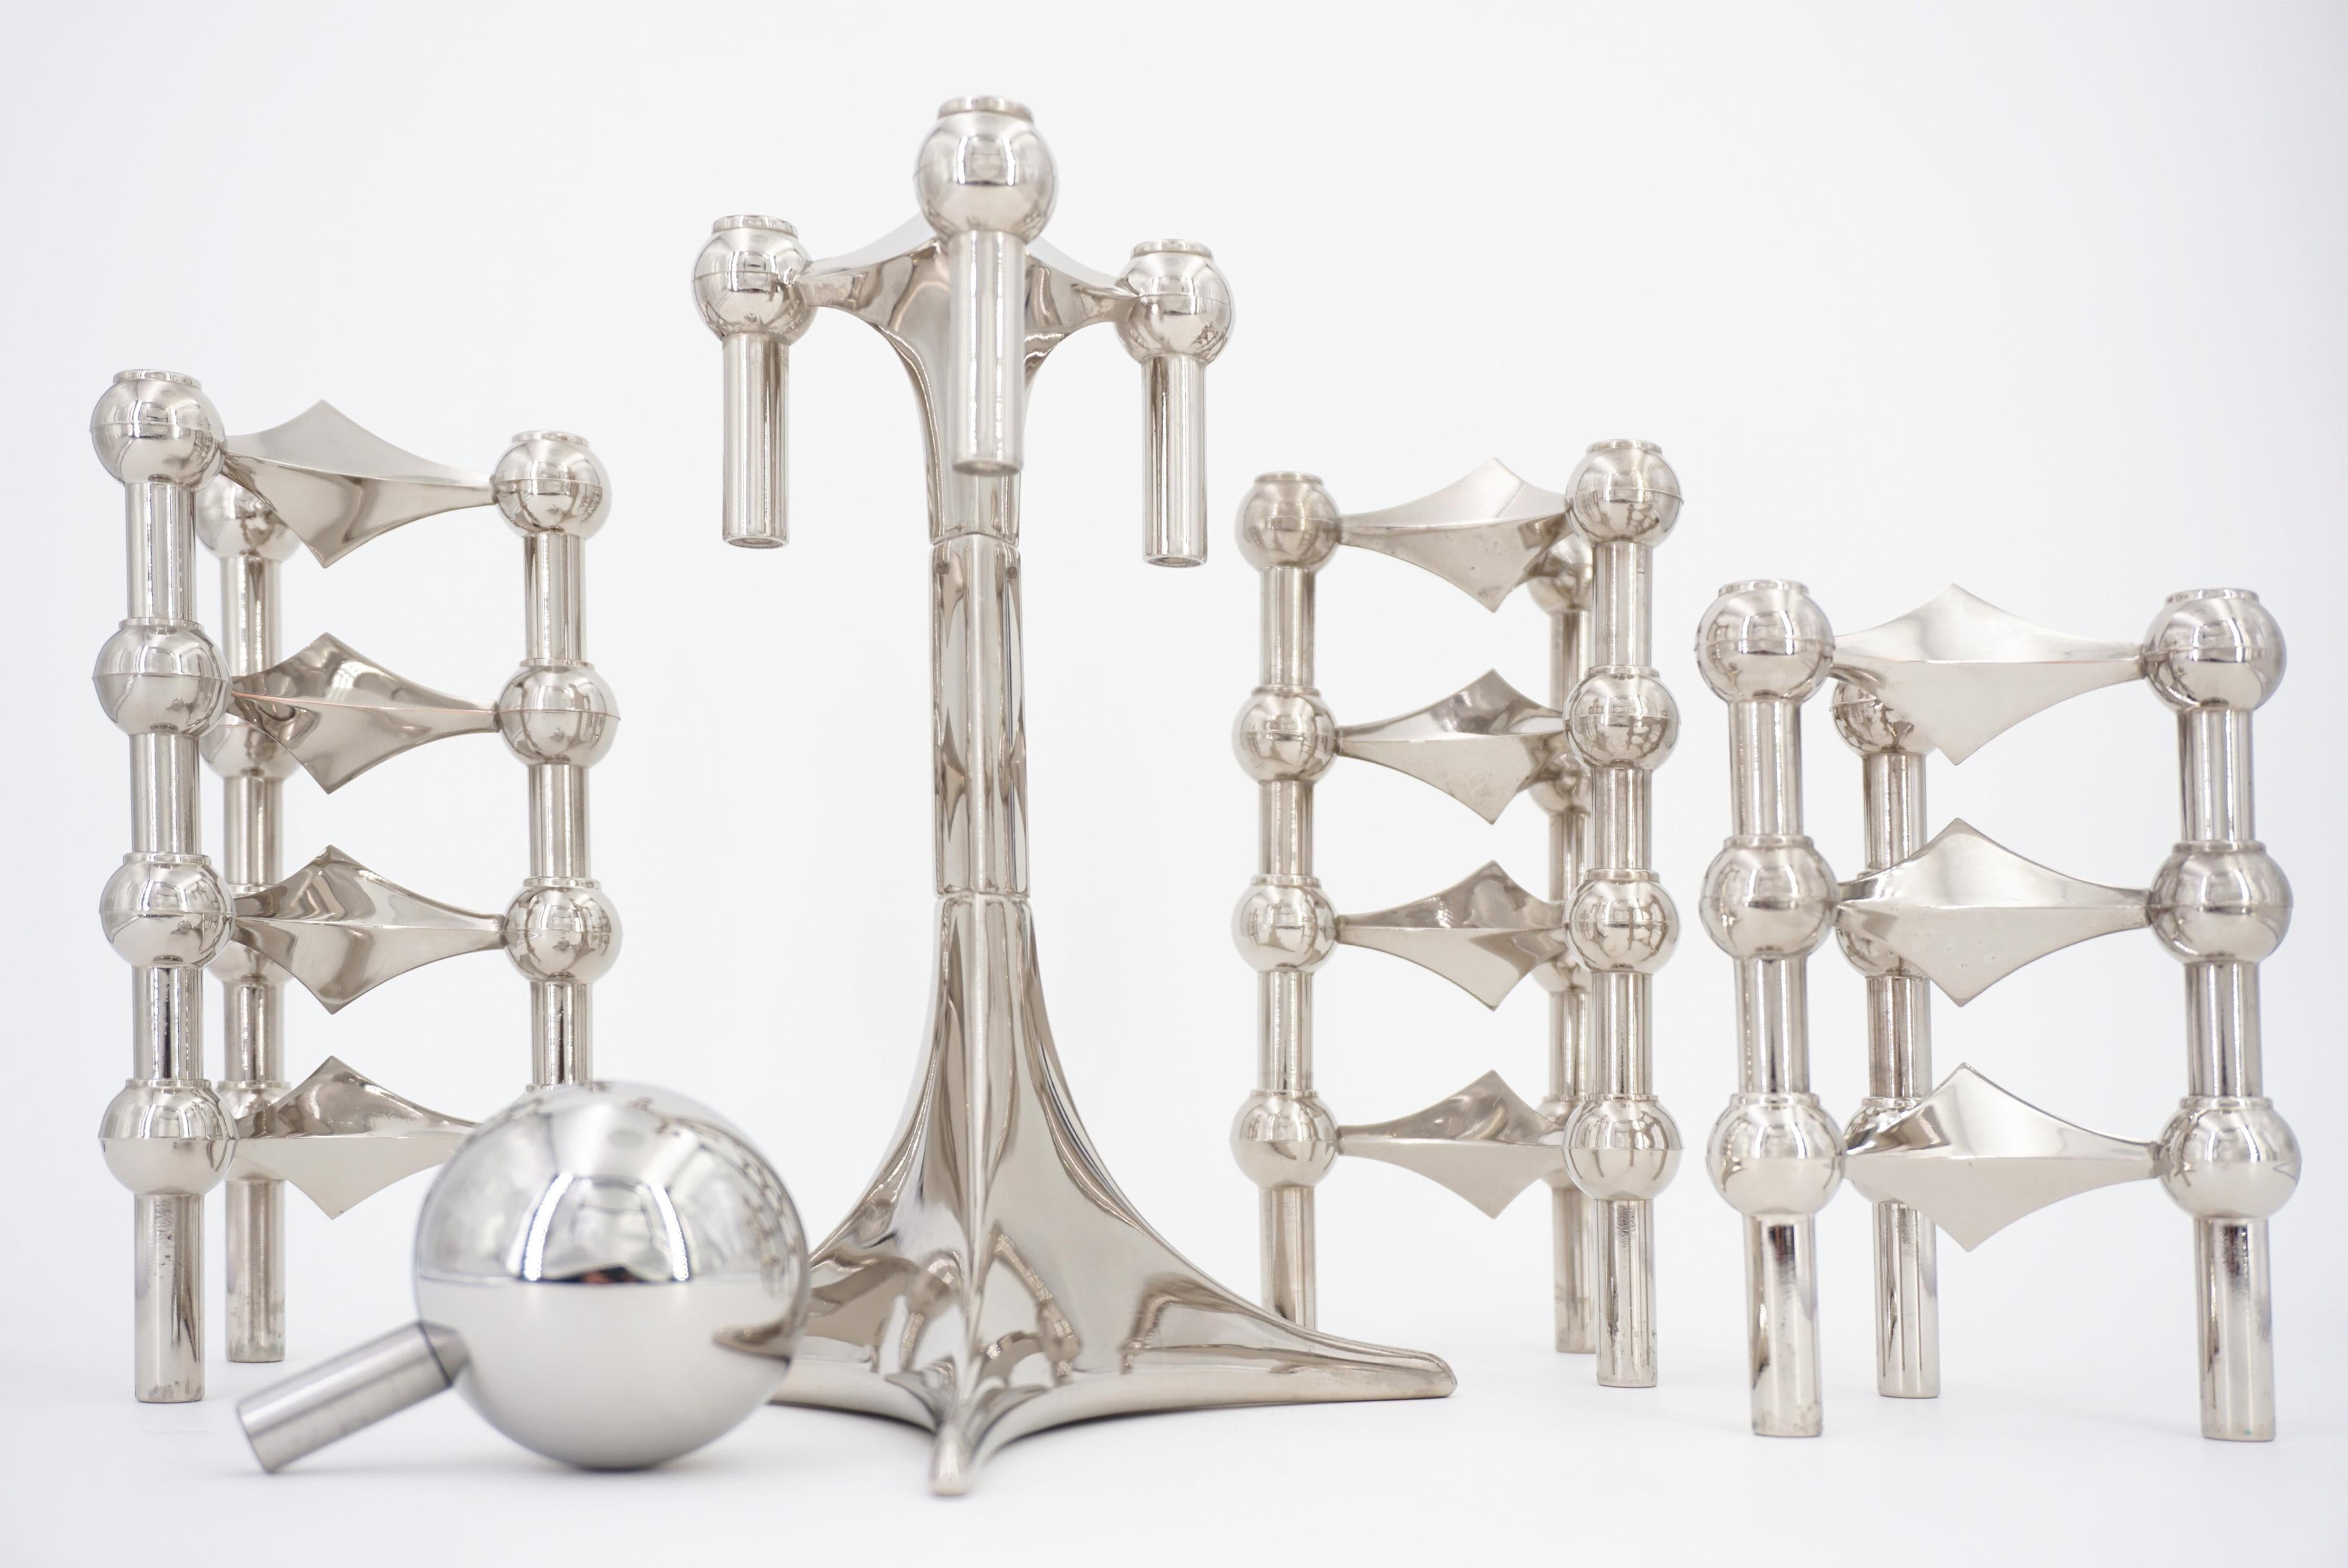 20th Century Fritz Nagel 1960s Design Modular and Chrome Candle Holder Set of S22 Collection